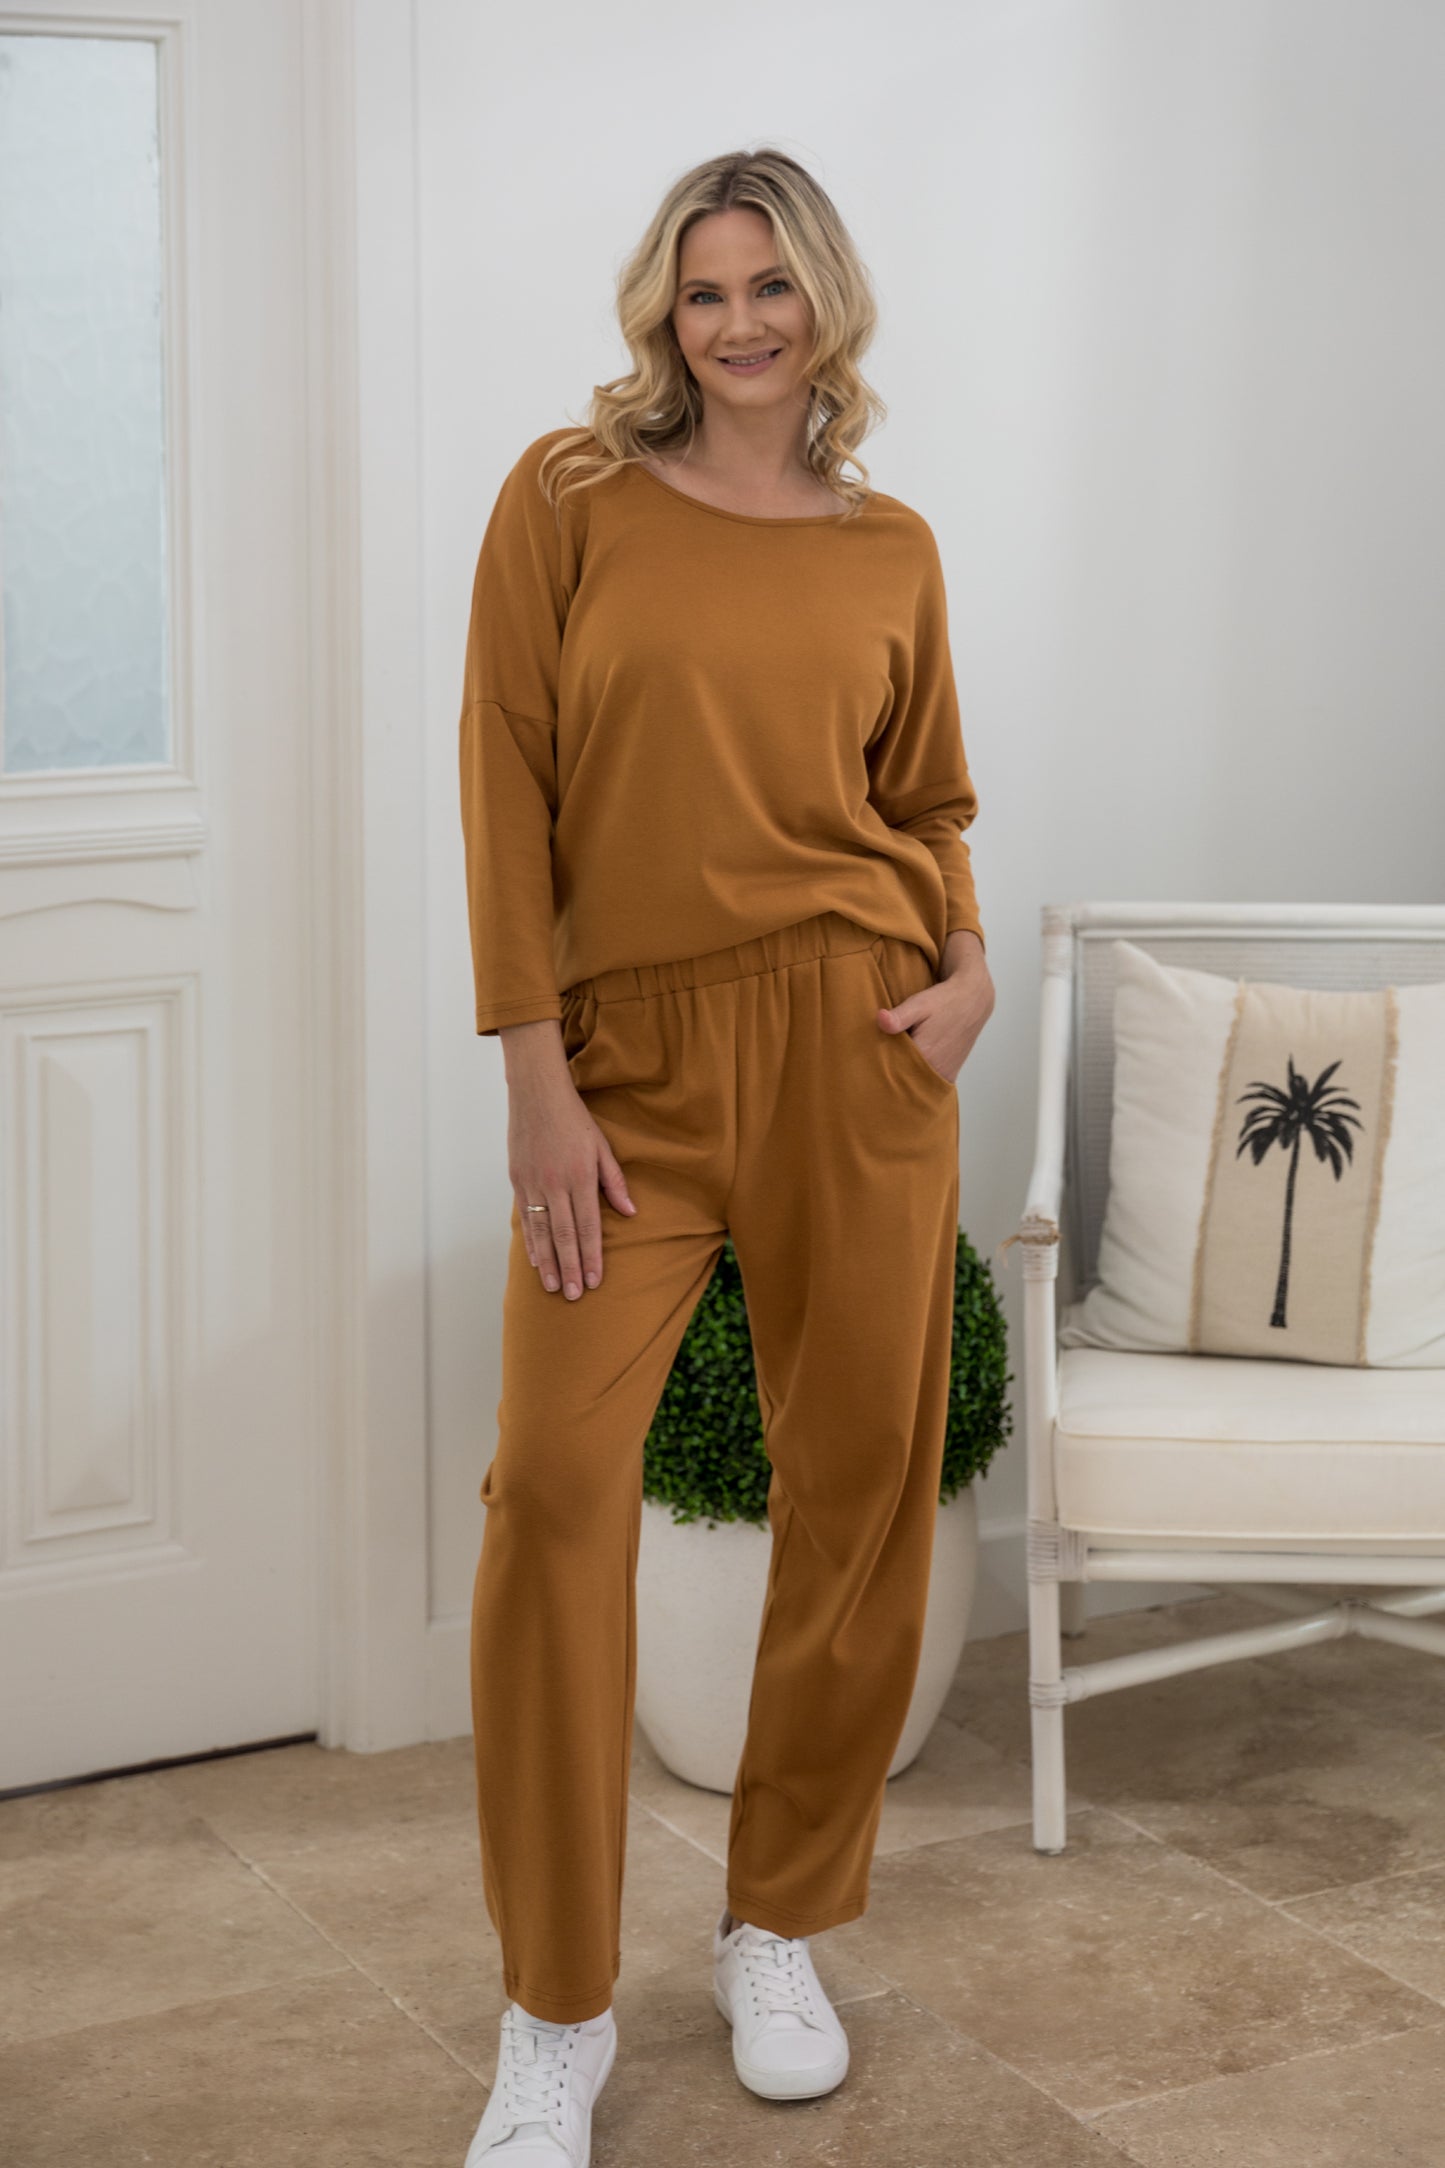 Long Sleeve Destiny Lounge Top in Toffee